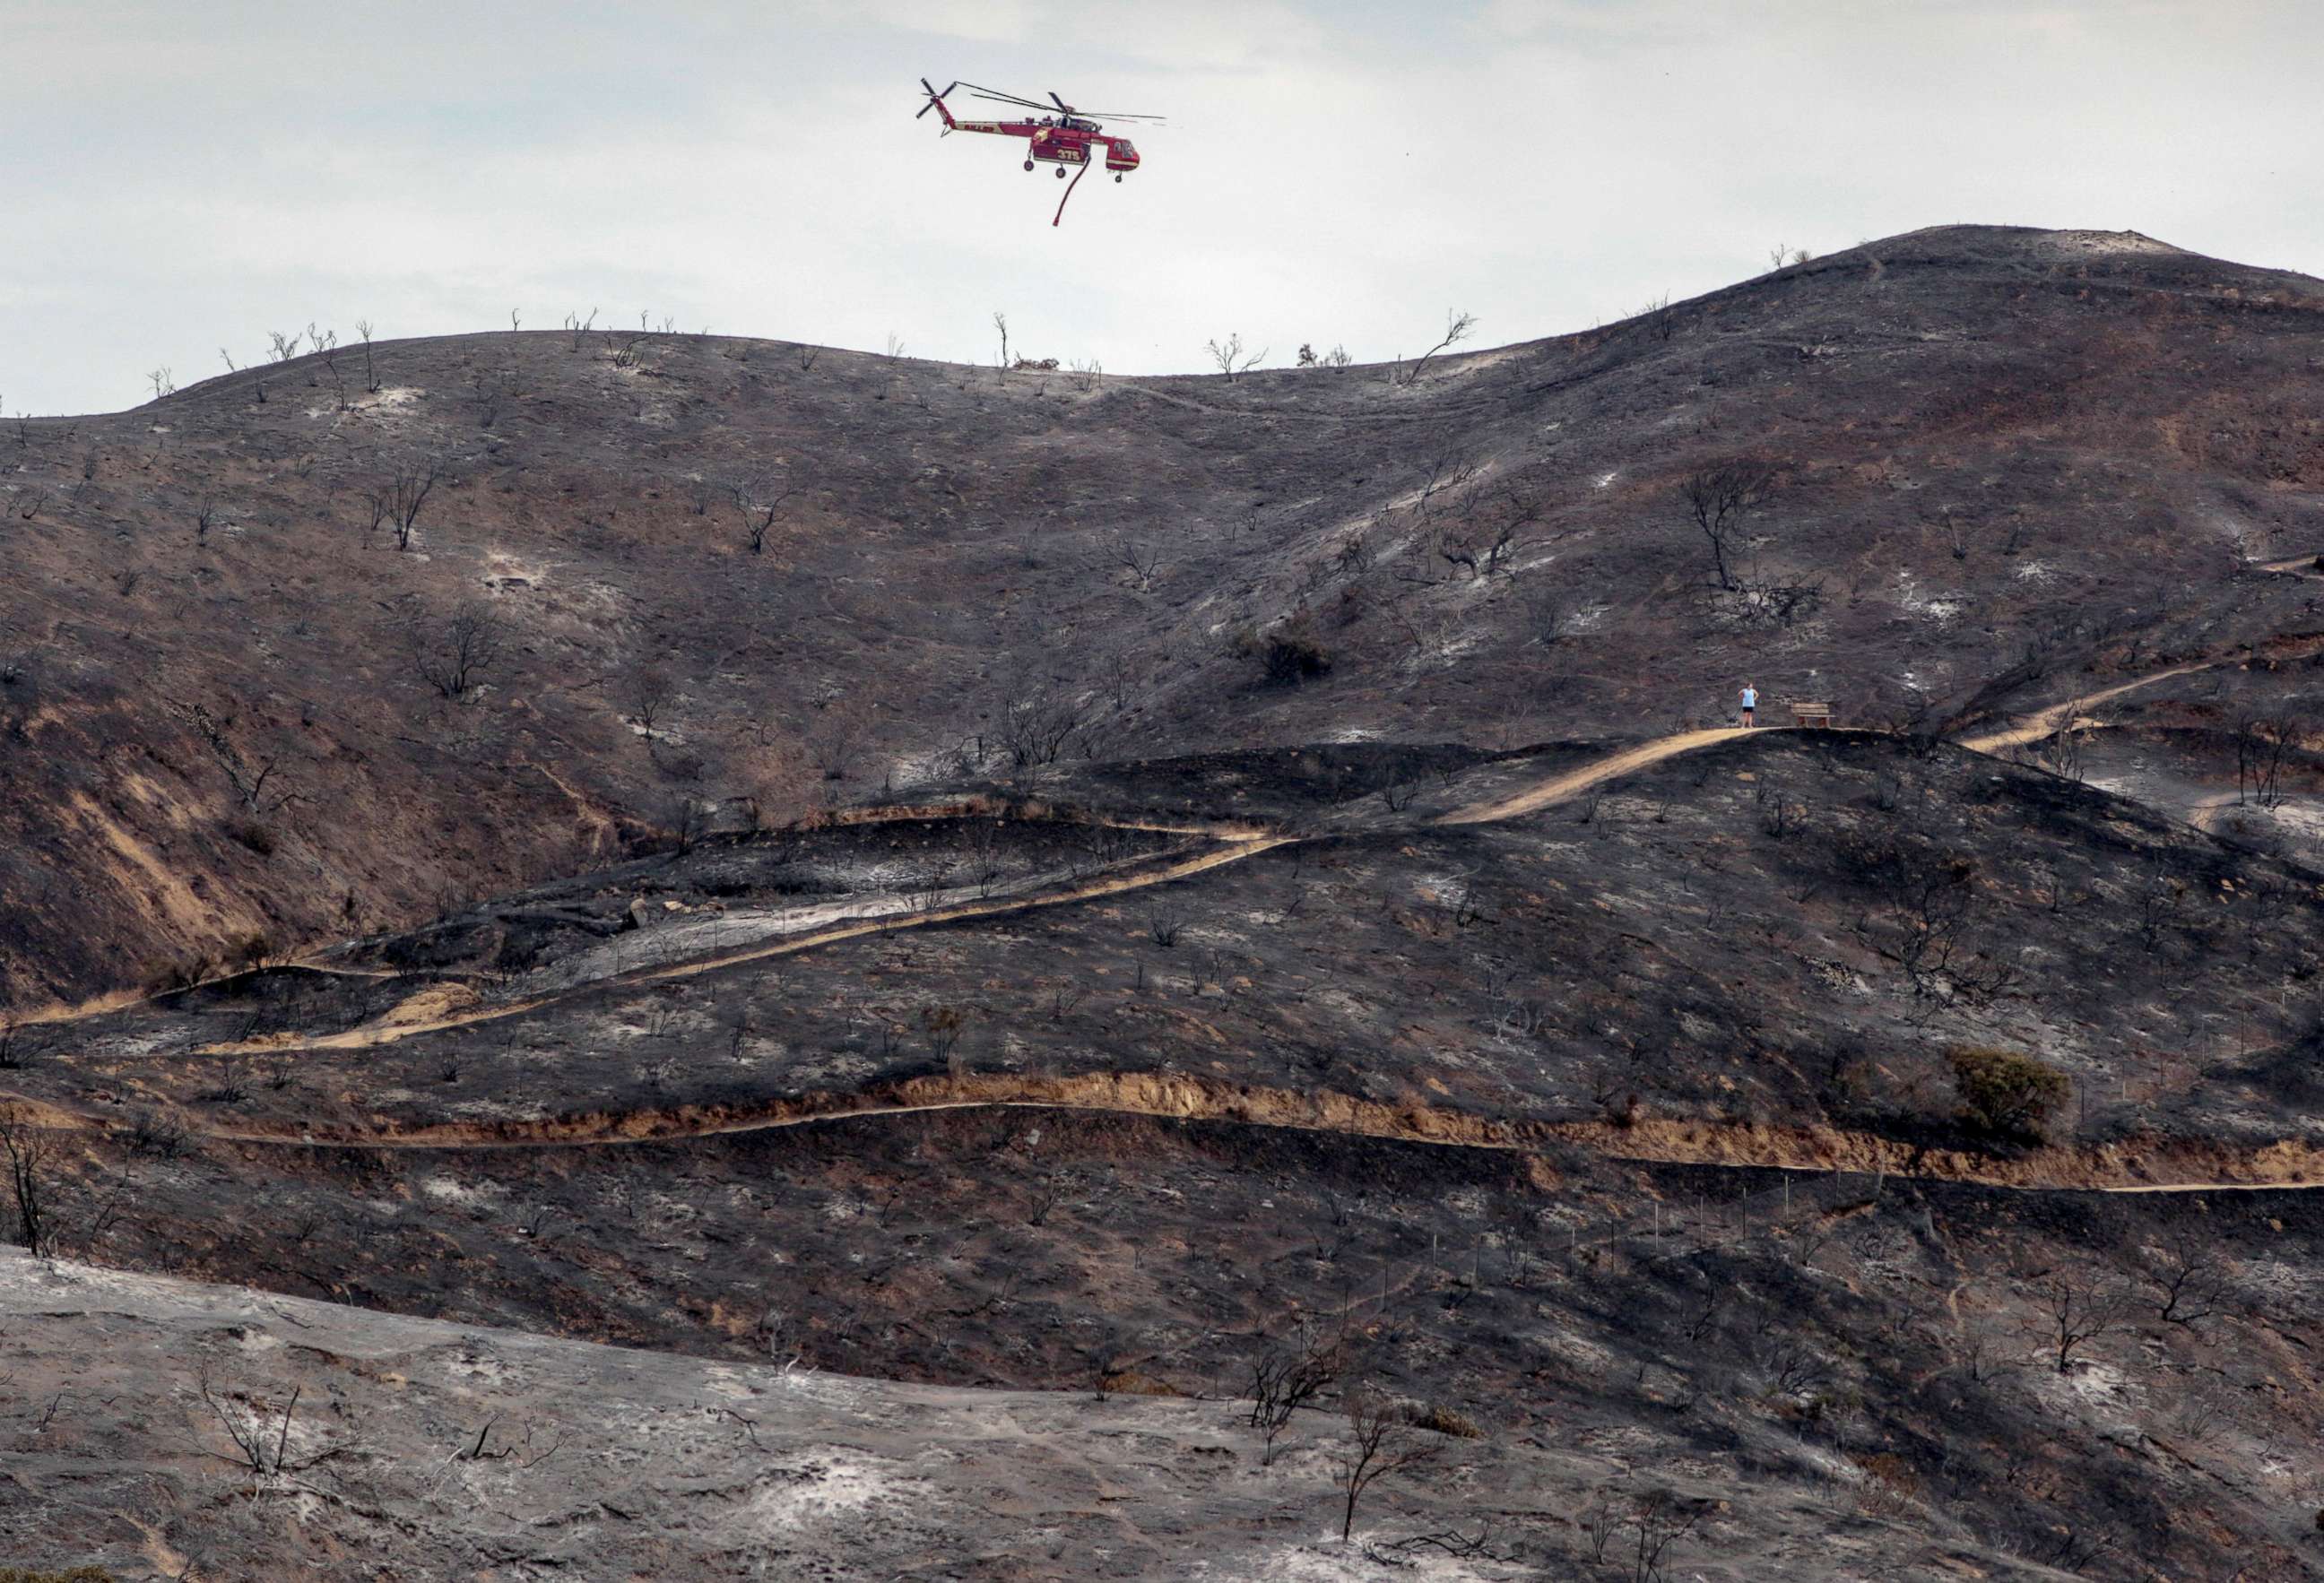 PHOTO: A firefighting helicopter flies over a charred hillside during the La Tuna Canyon fire near Burbank, California, September 3, 2017